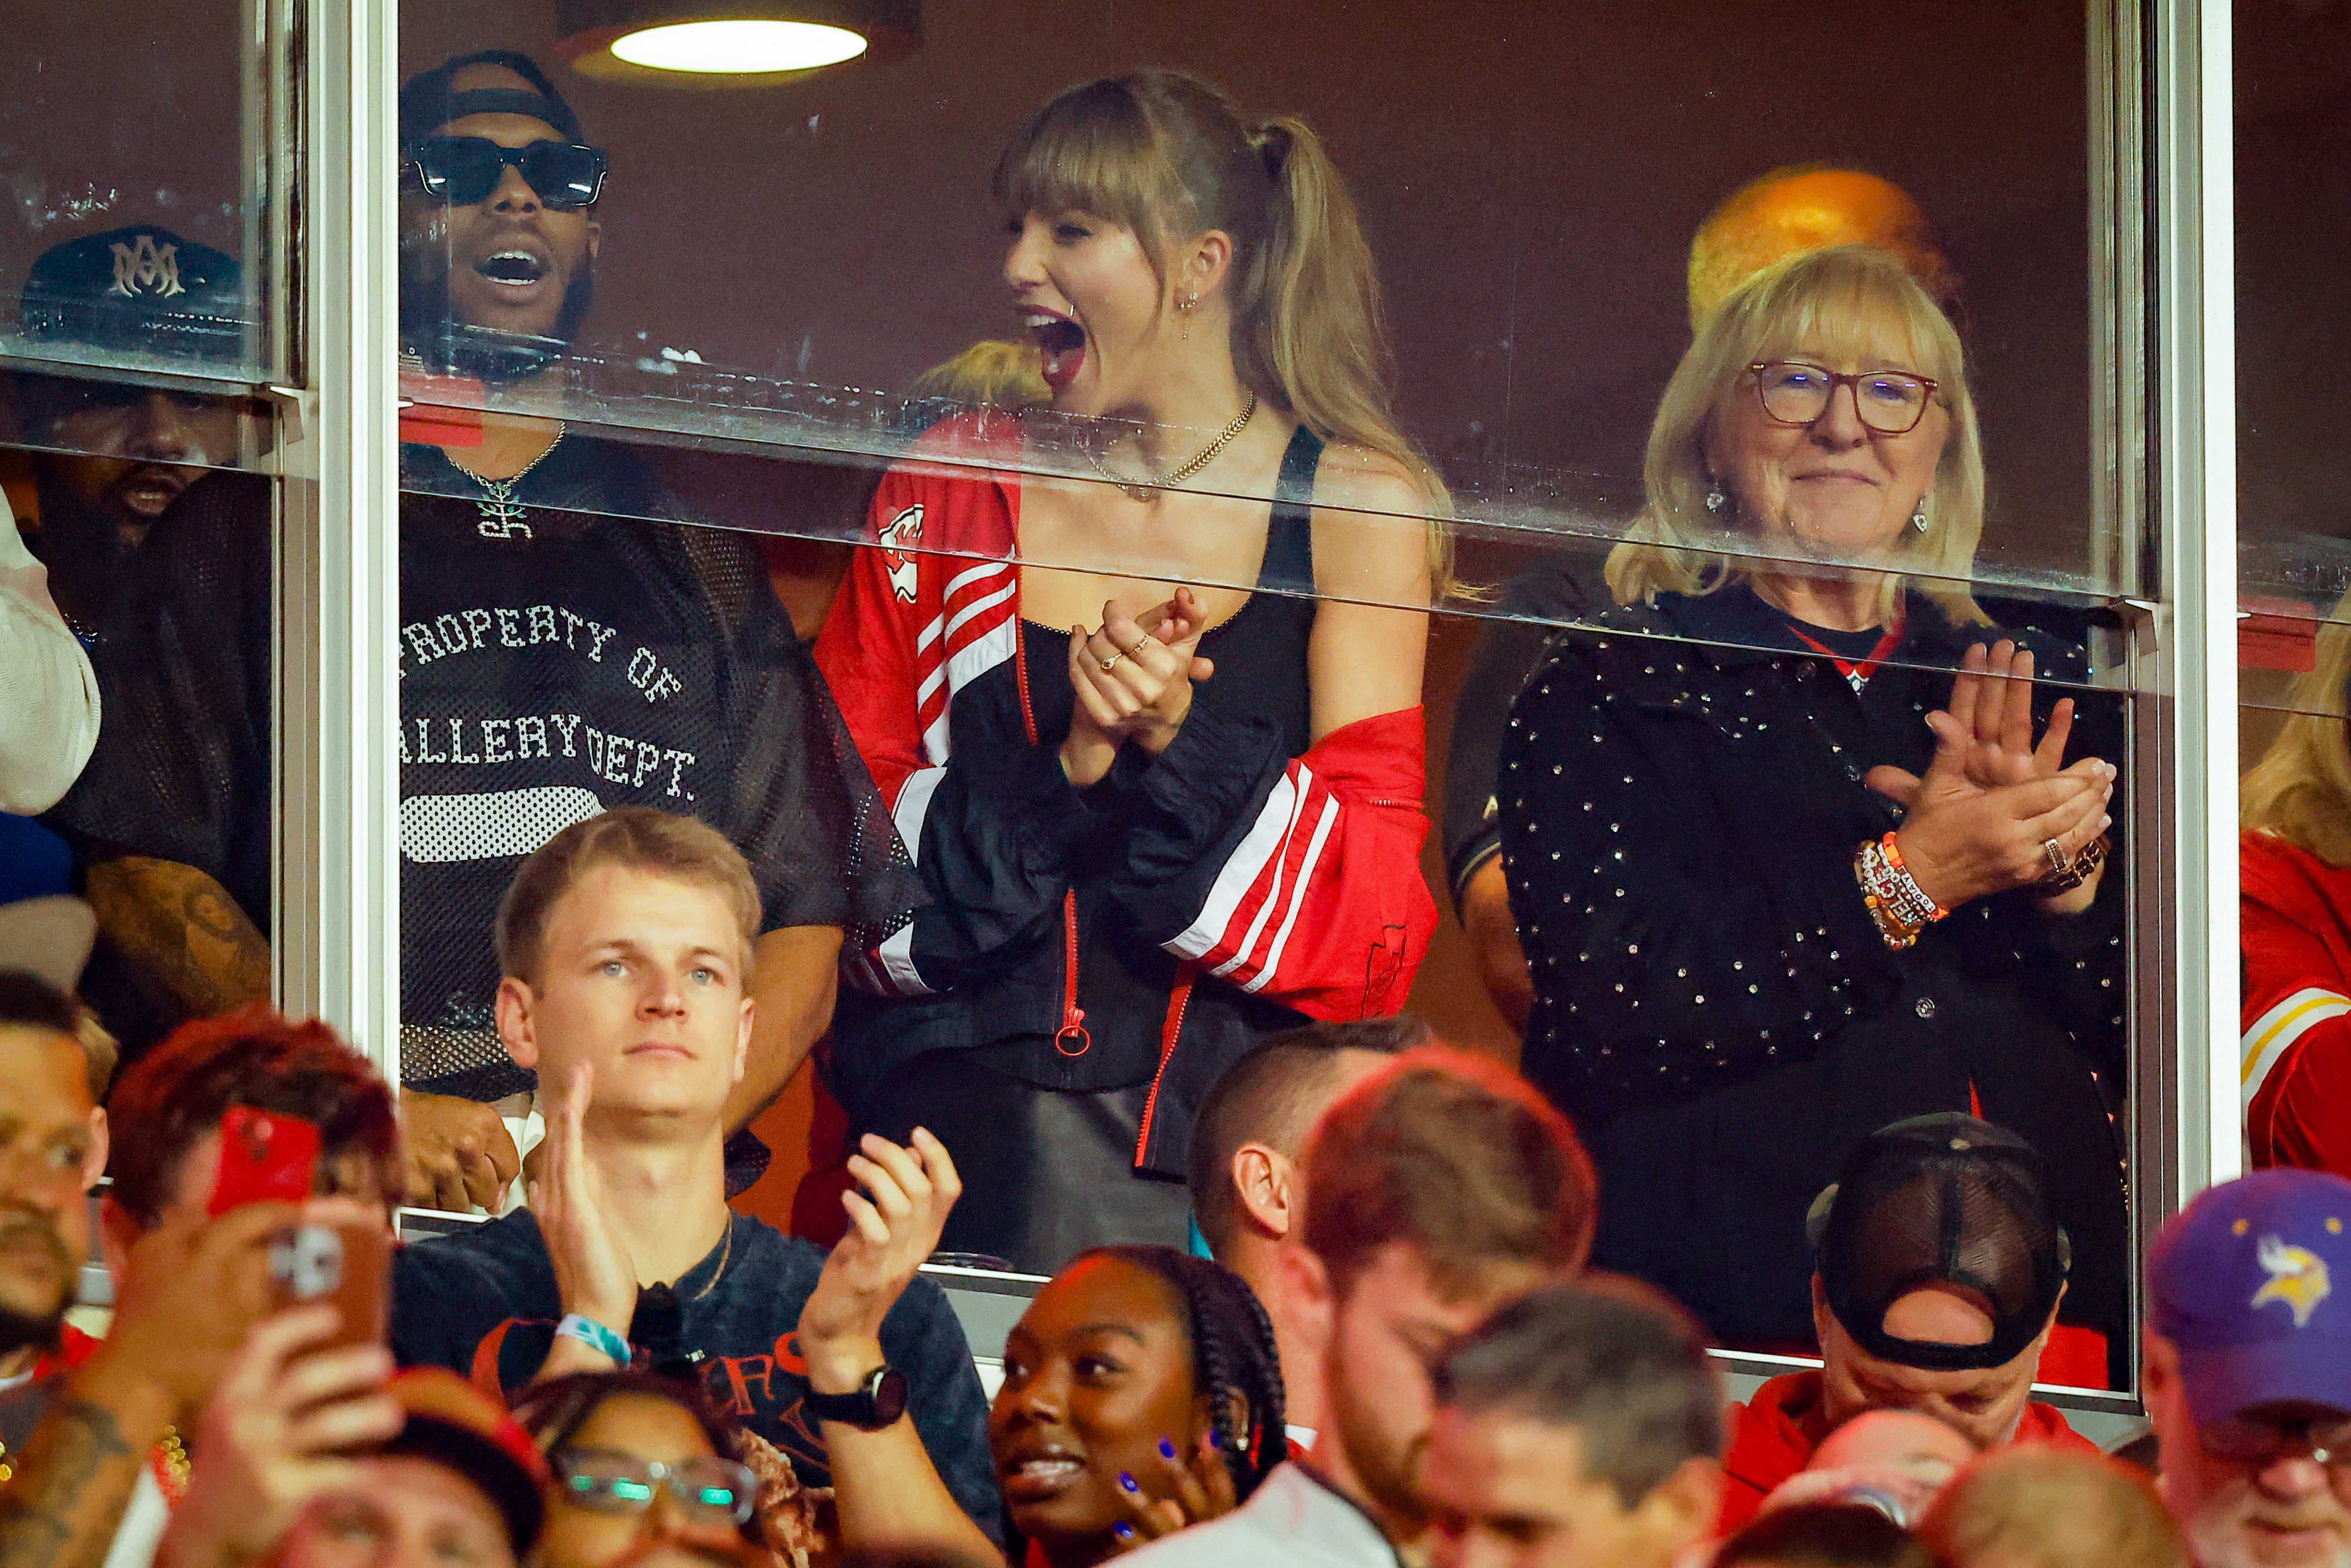 Taylor celebrating with others in a VIP suite